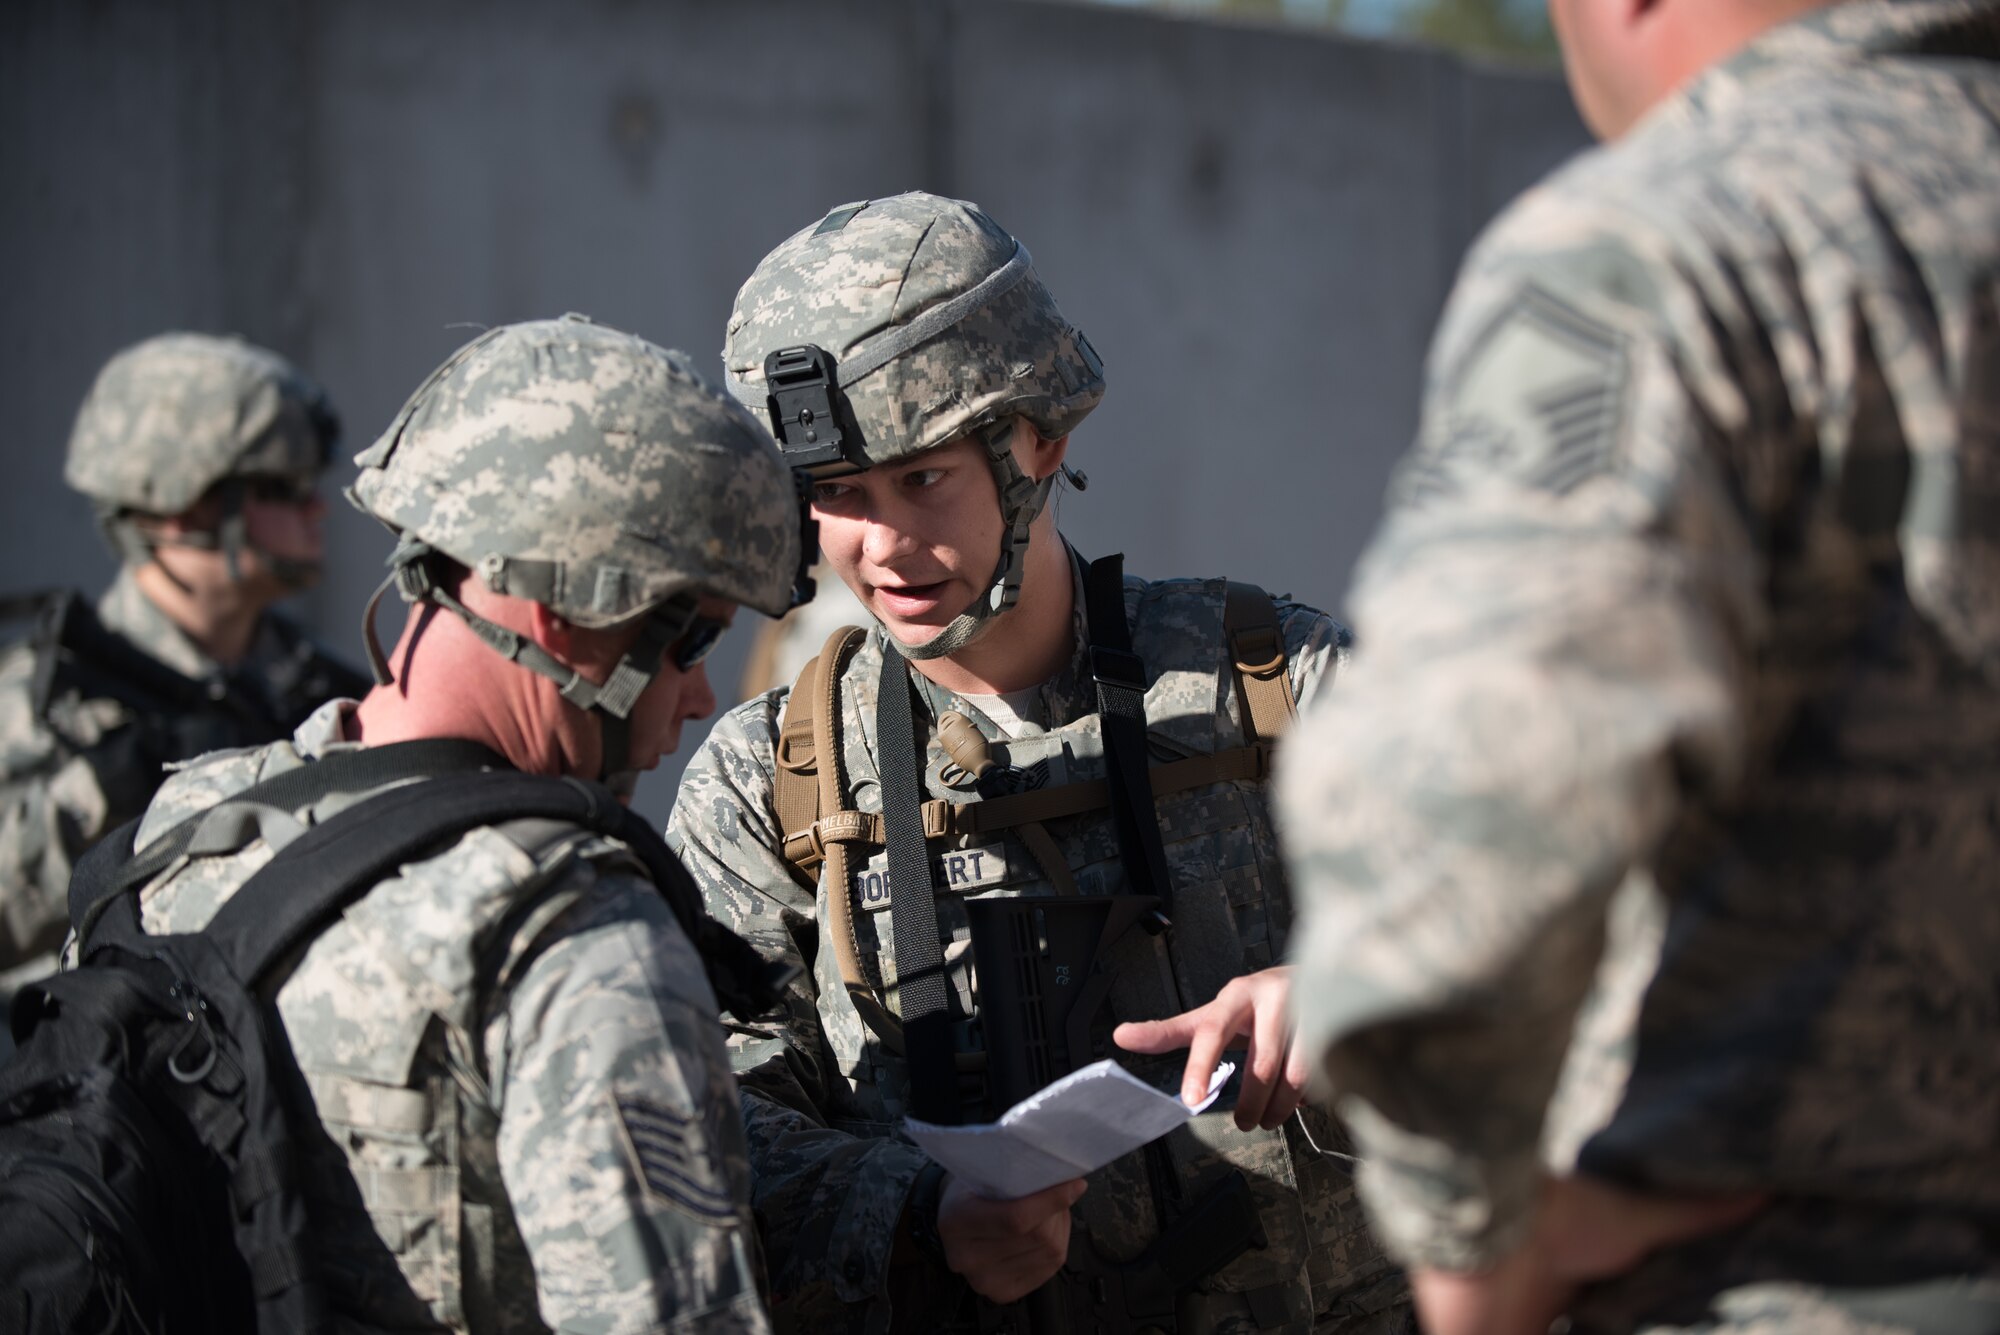 Tech. Sgt. Gary Coy (left) and Tech. Sgt. Julian Borchert, squad leaders from the Kentucky Air National Guard’s 123rd Security Forces Squadron, discuss plans to recover a simulated downed pilot inside a mock Afghan Village at Fort Knox, Ky., Oct. 20, 2015. The Airmen were required to execute a coordinated search while defending their positions and engaging hostile forces. (U.S. Air National Guard photo by Maj. Dale Greer)